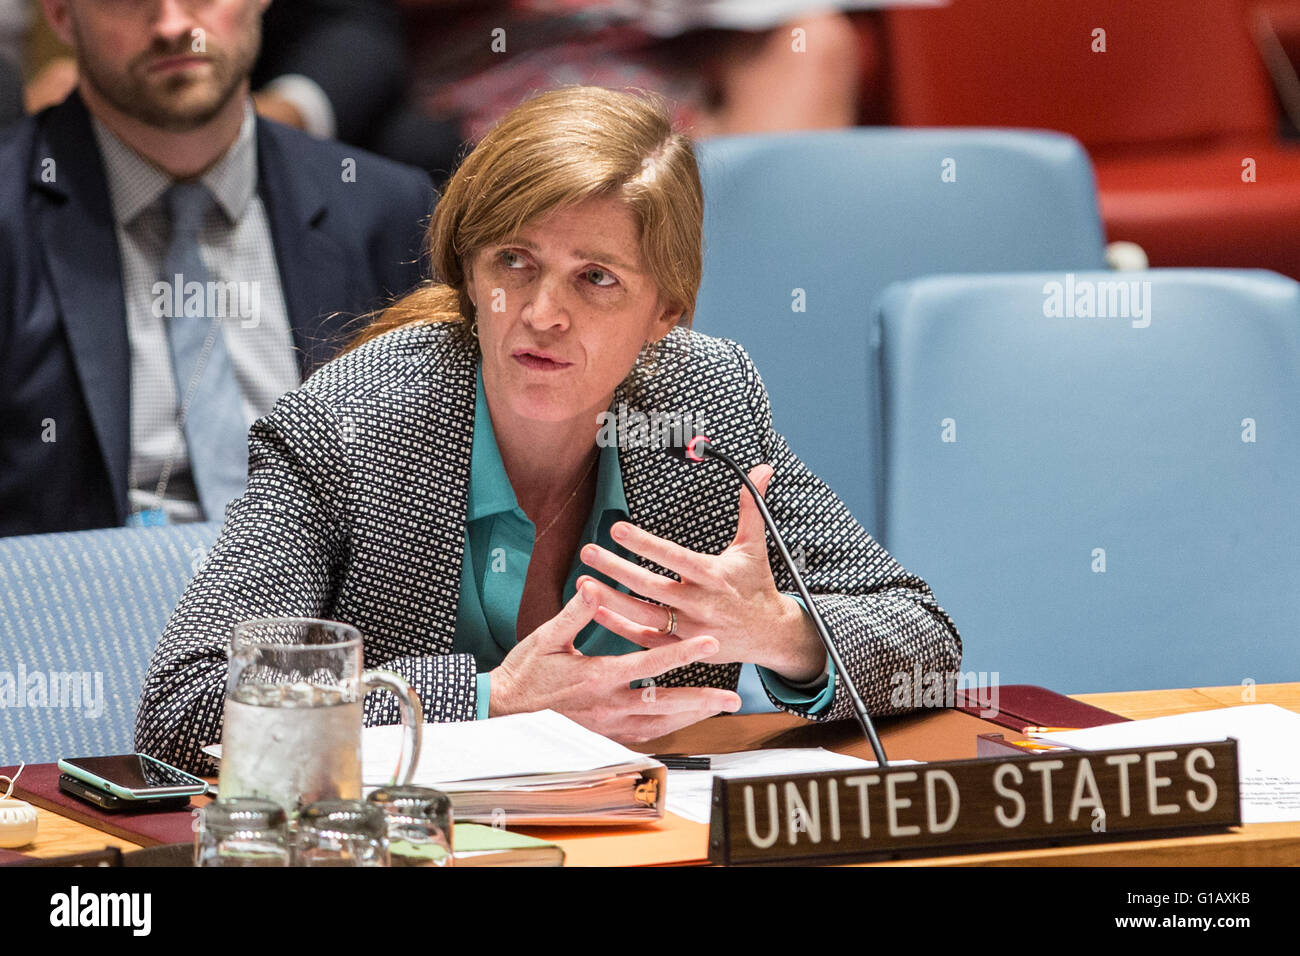 United Nations, UN headquarters in New York. 11th May, 2016. Samantha Power, U.S. Permanent Representative to the United Nations, addresses a Security Council meeting on threats to international peace and security caused by terrorist acts, at the UN headquarters in New York, May 11, 2016. © Li Muzi/Xinhua/Alamy Live News Stock Photo